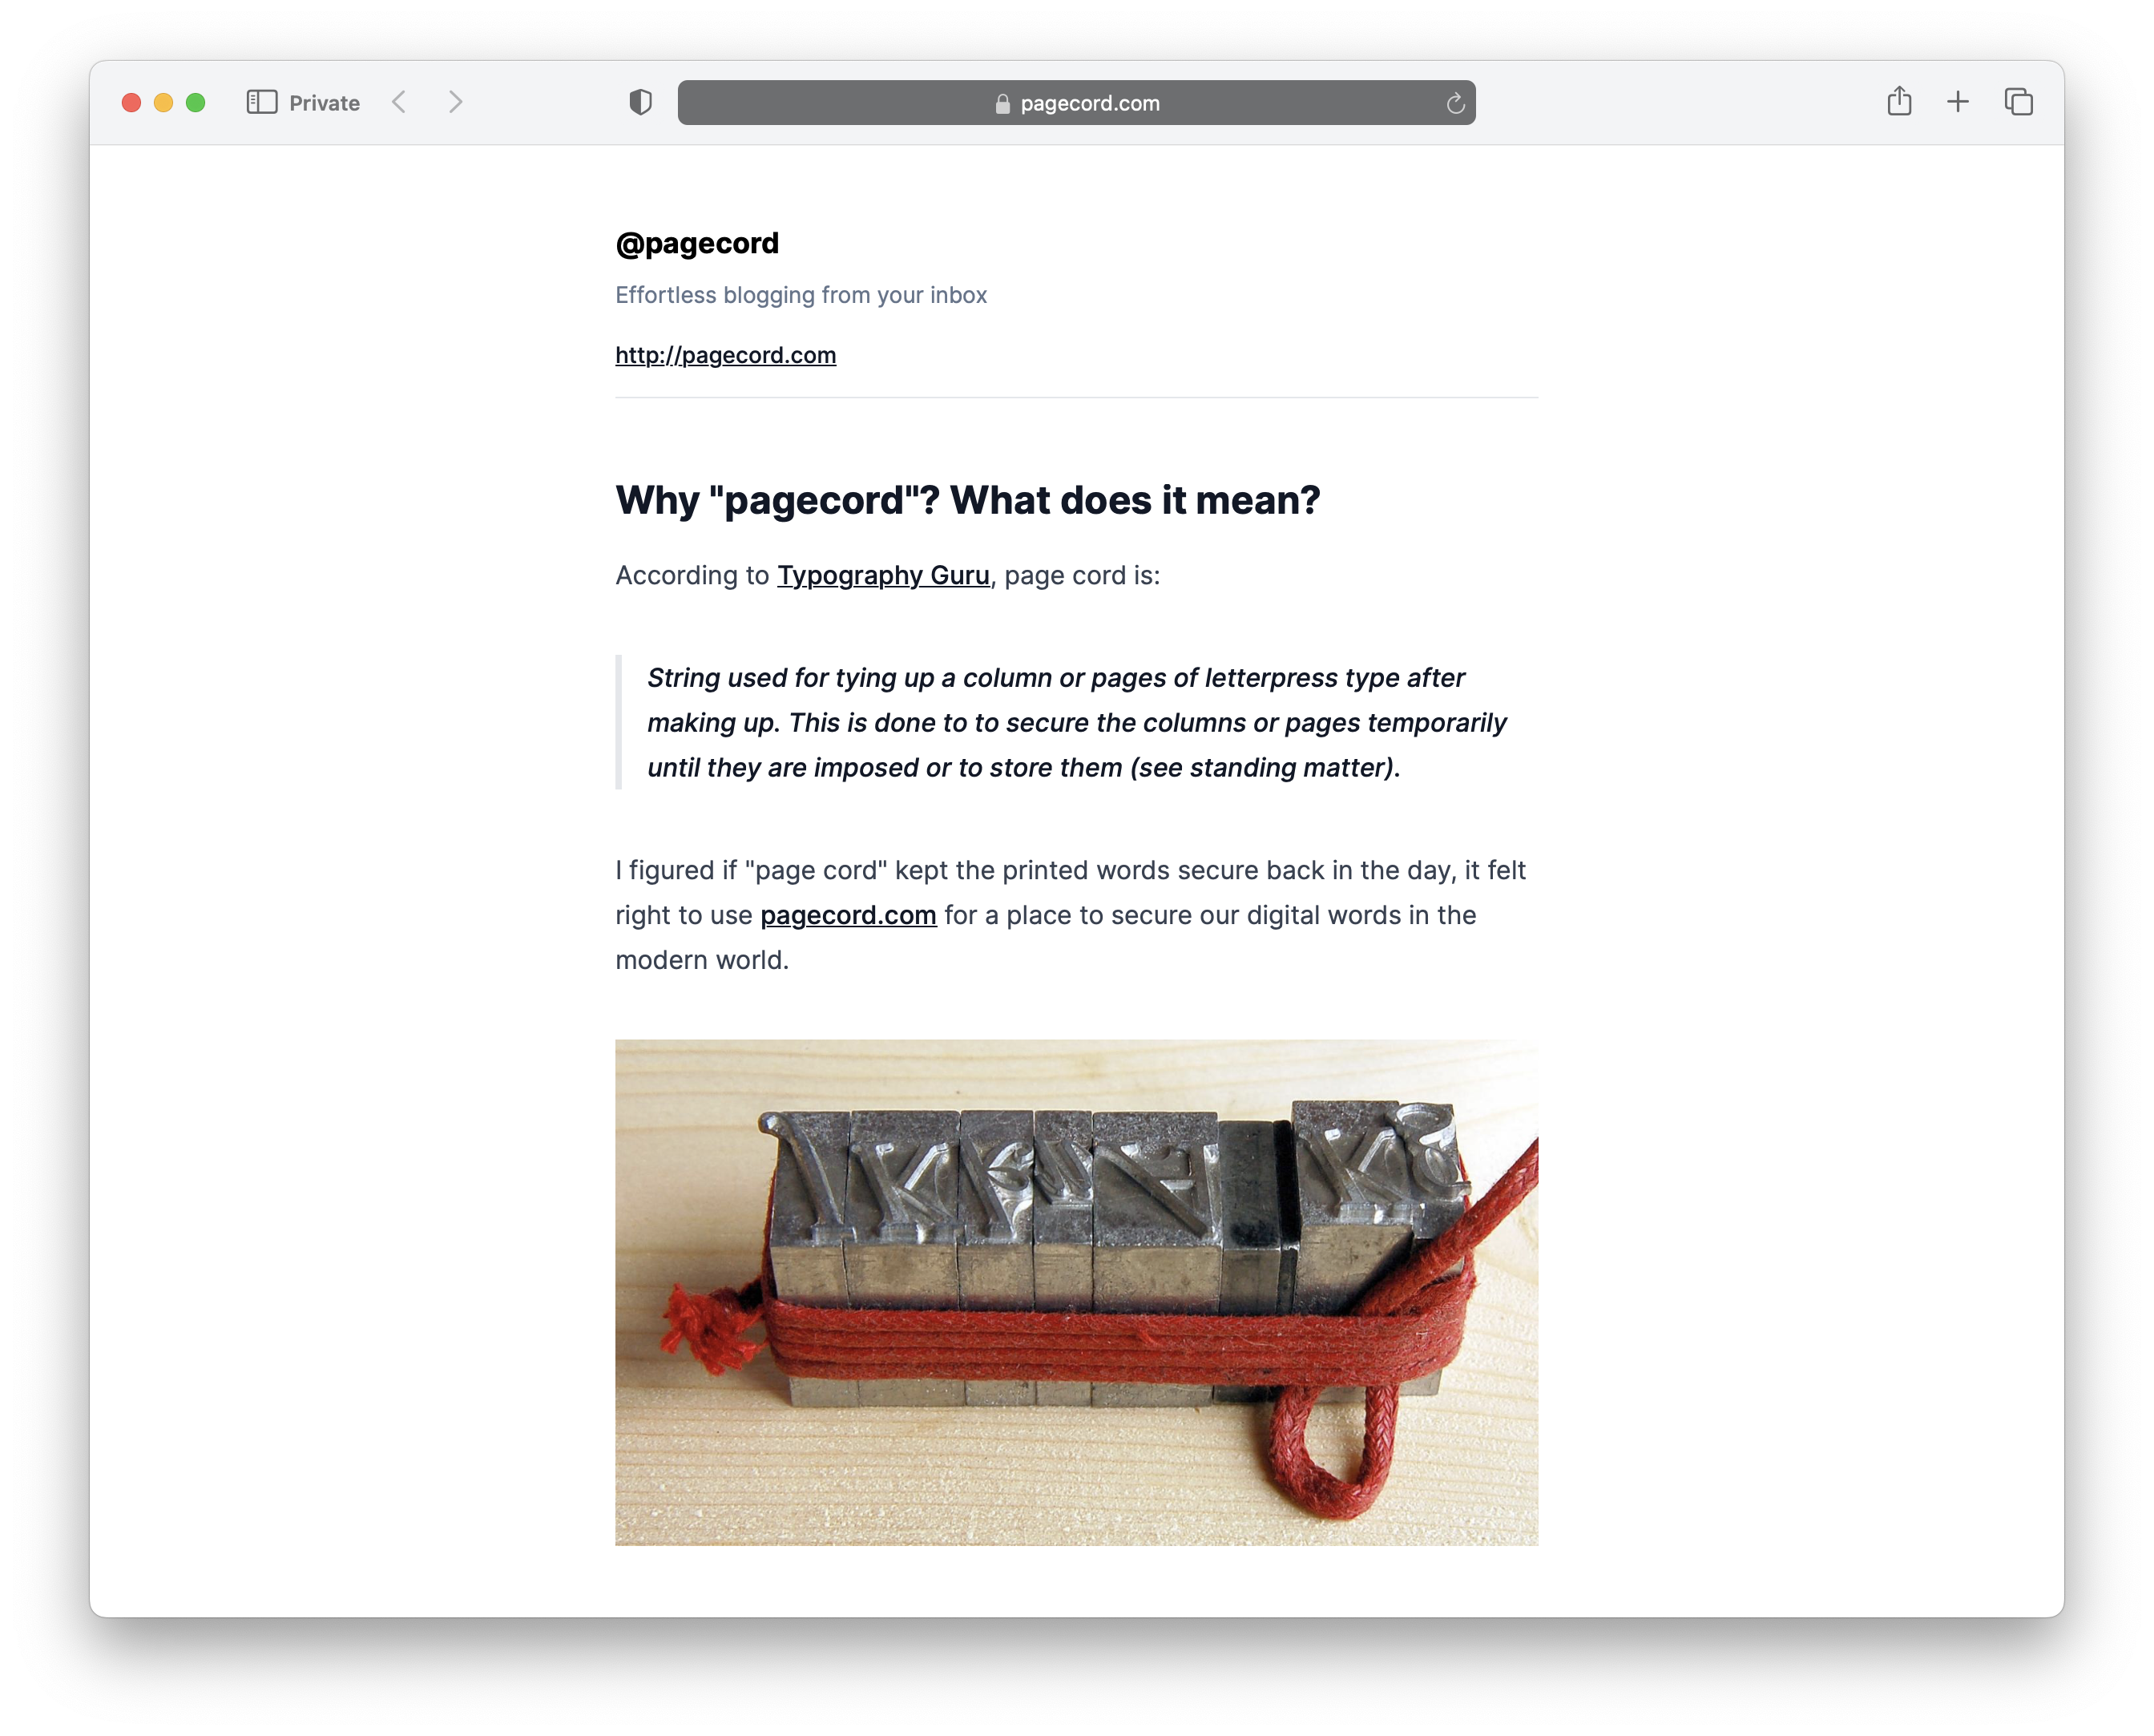 pagecord - Effortless blogging from your inbox